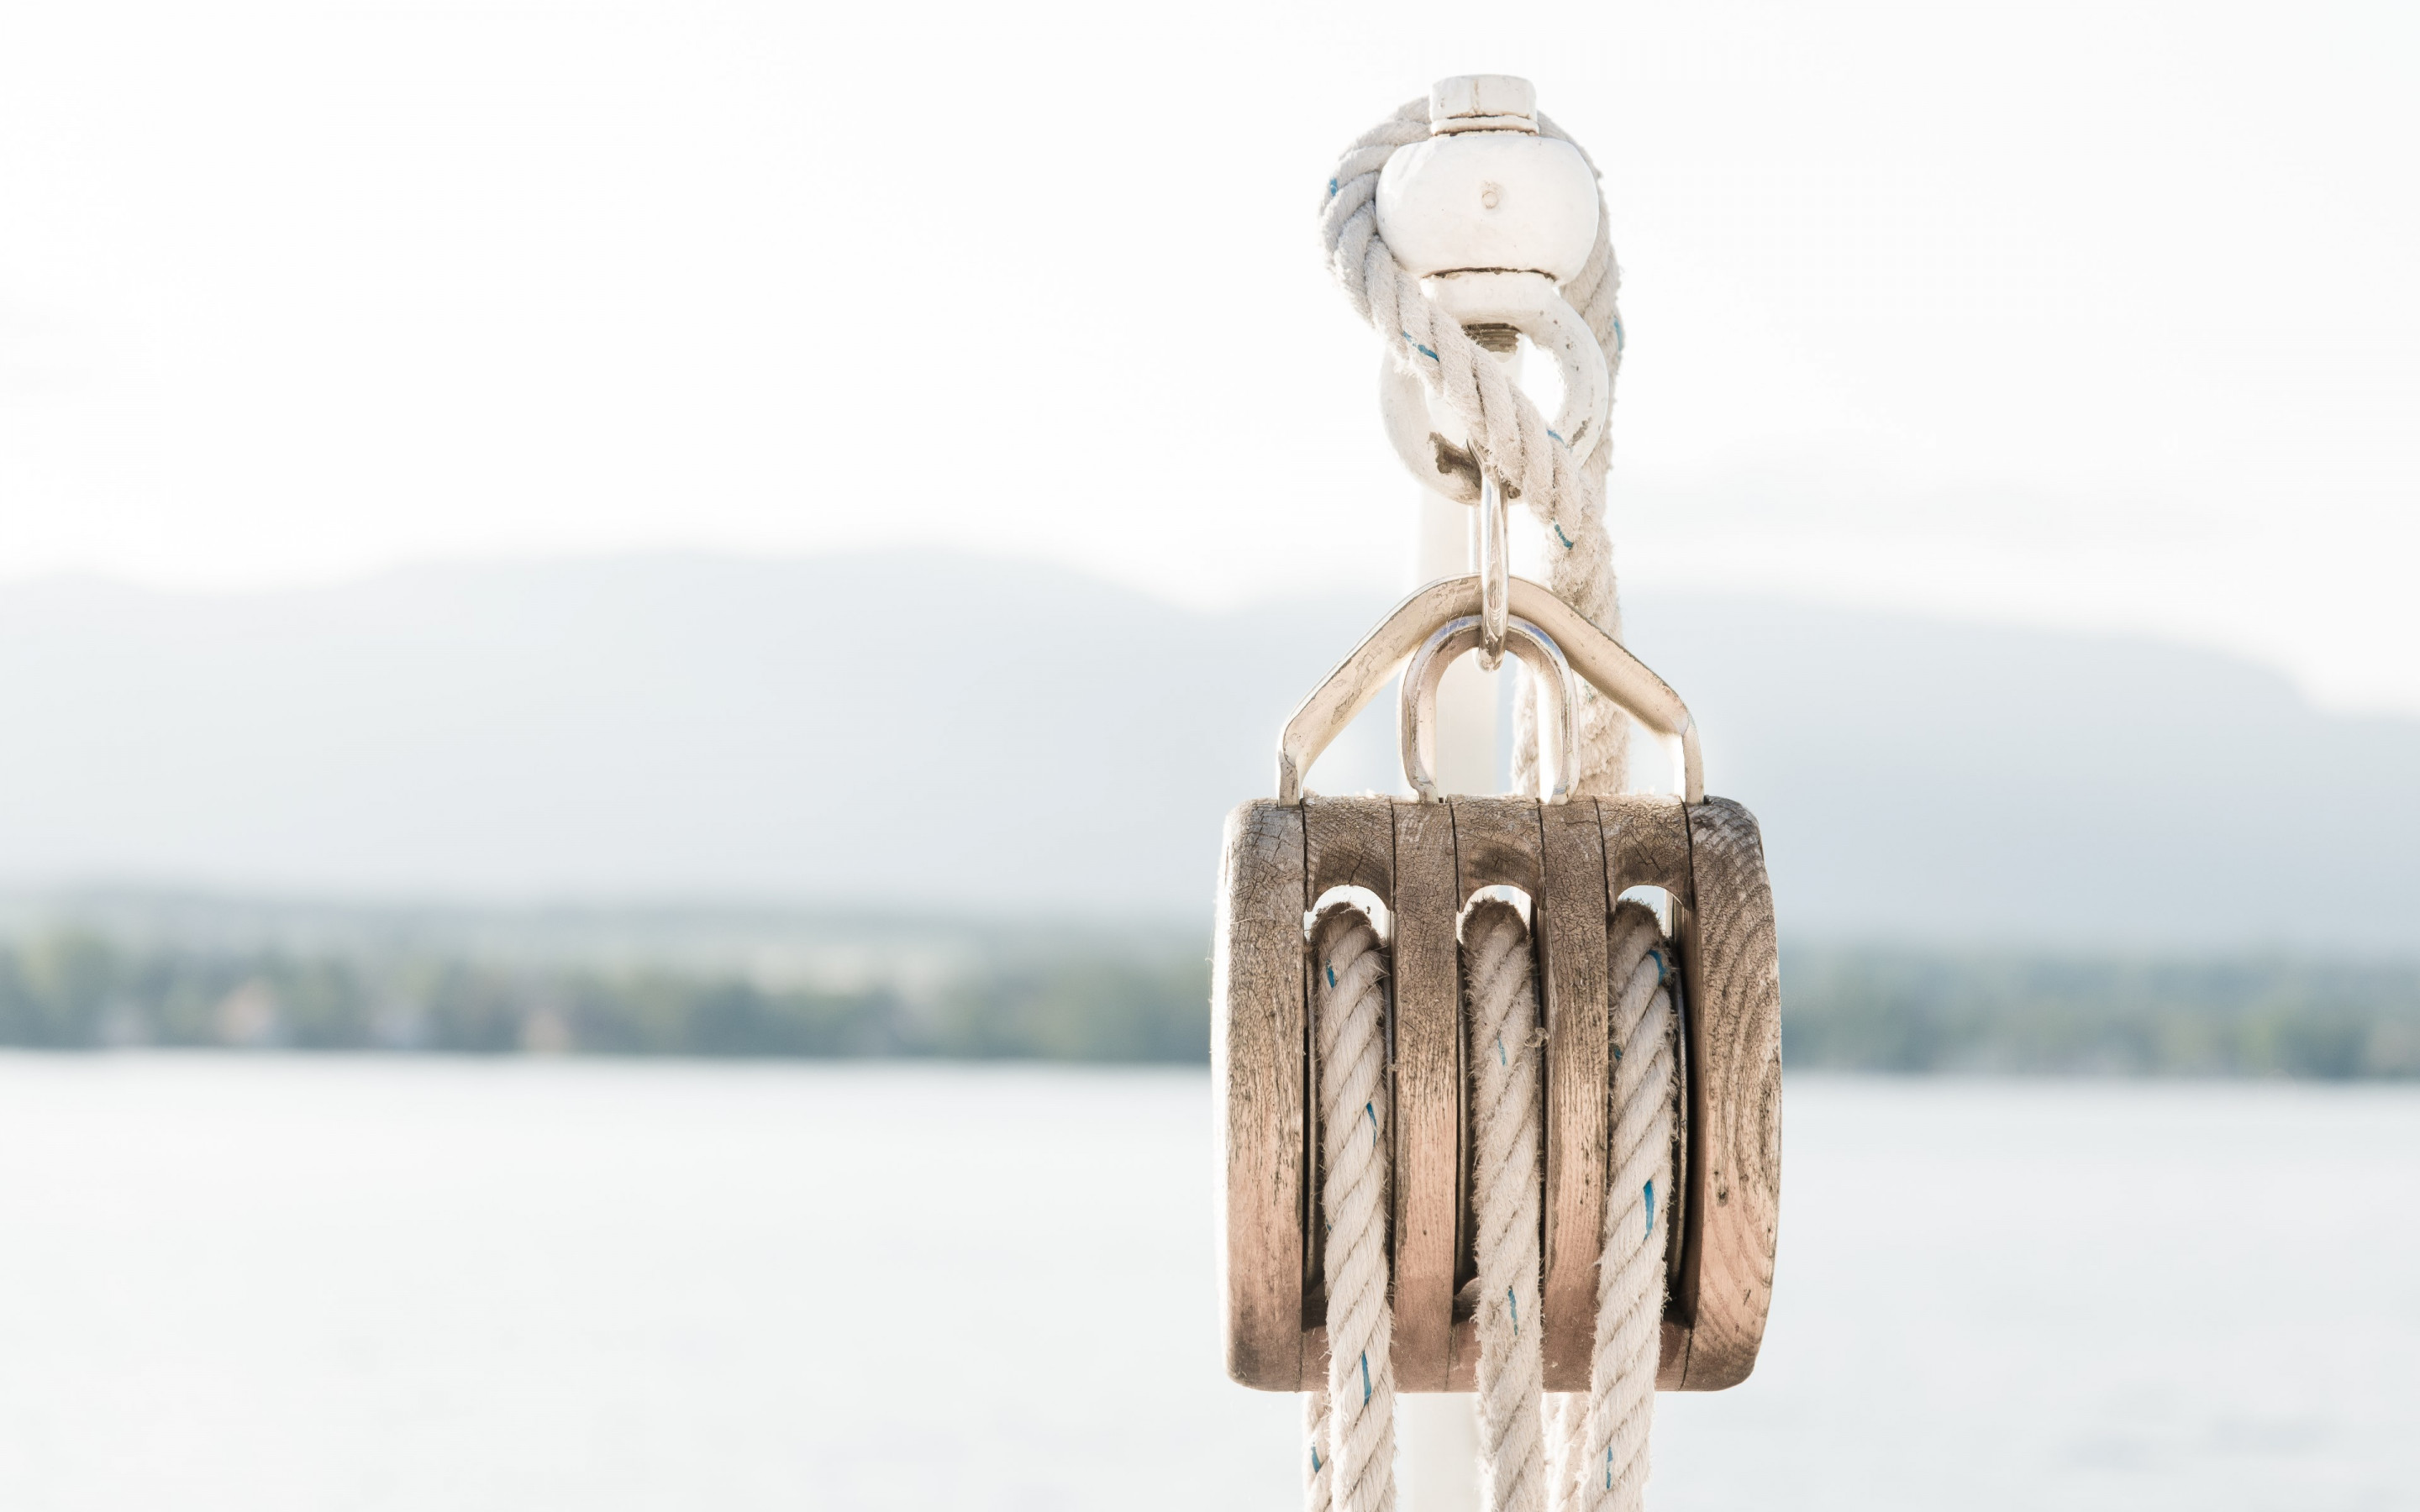 Pulley on a boat wallpaper 2880x1800